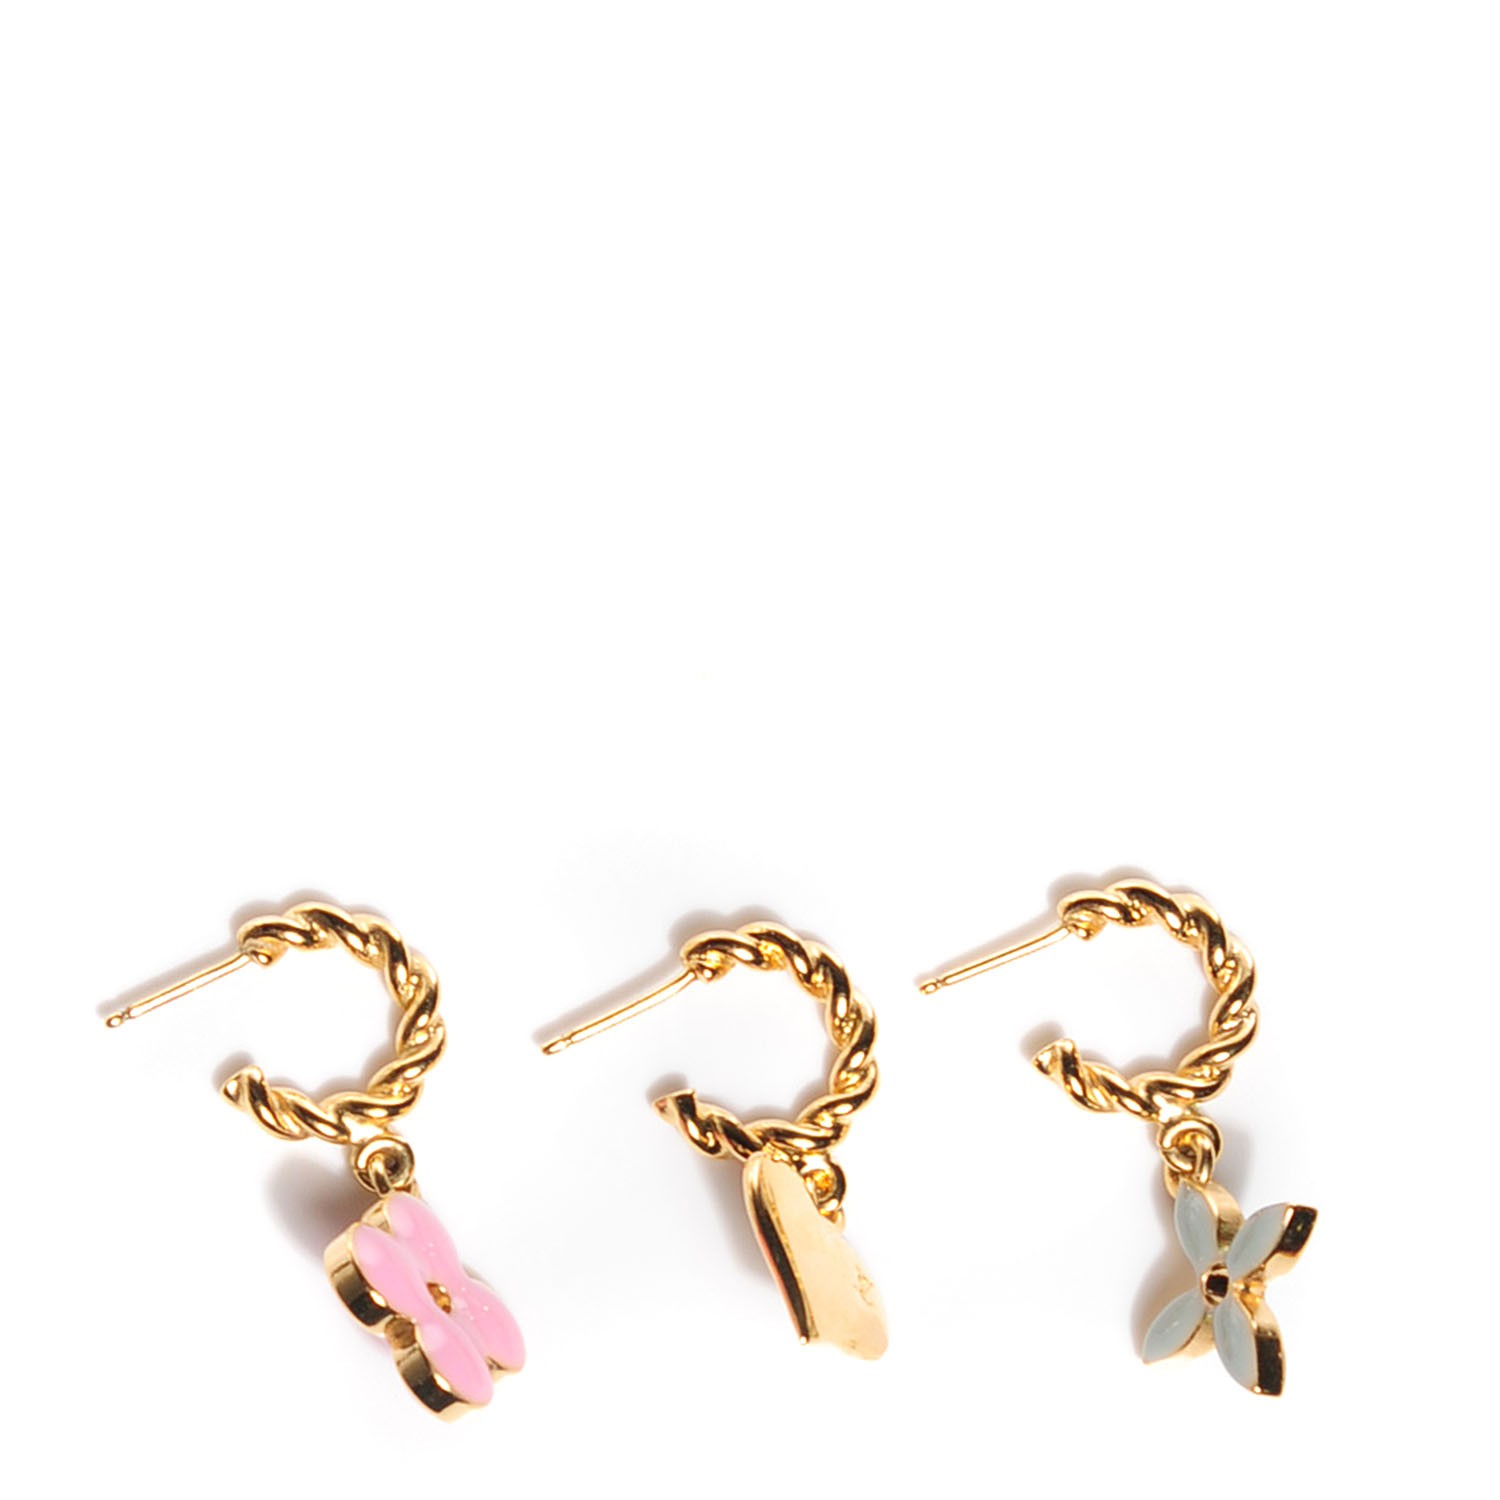 Lv Initials Earrings Other  Natural Resource Department